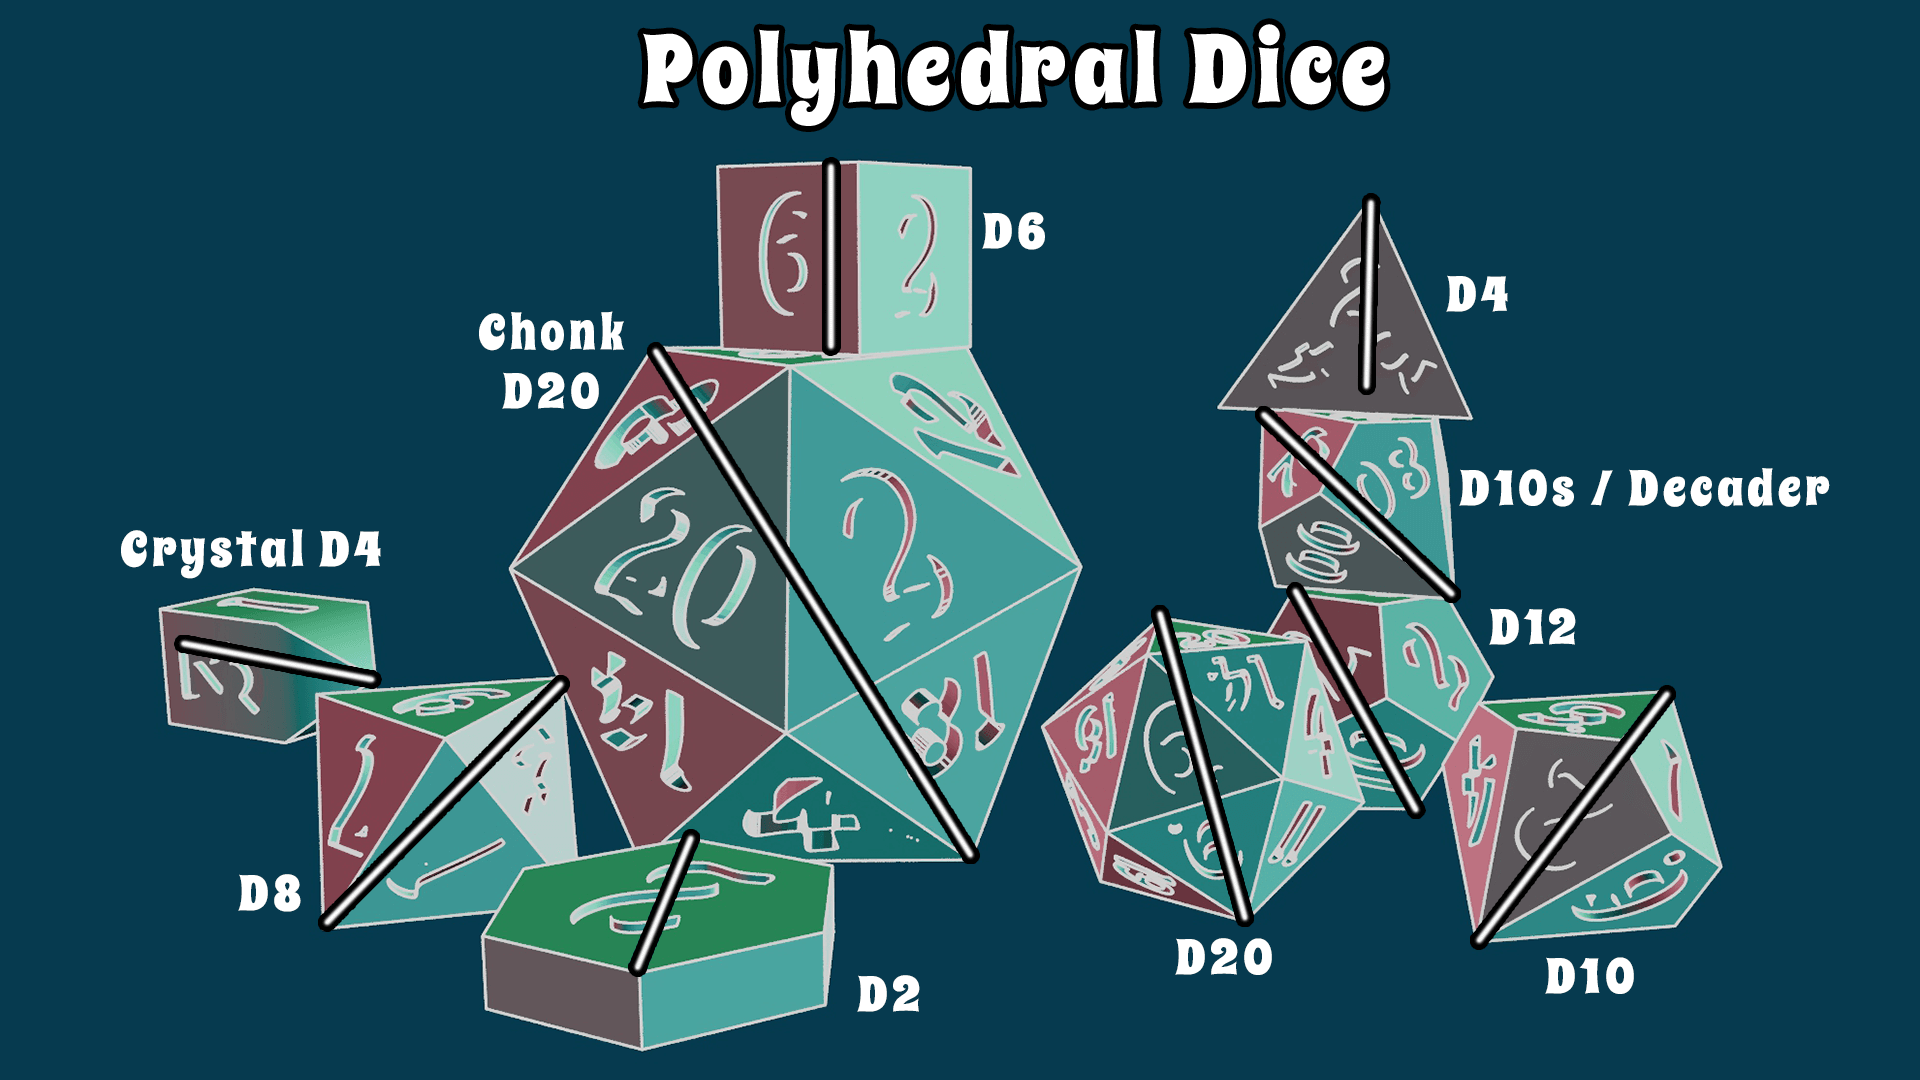 *Polyhedral Dice